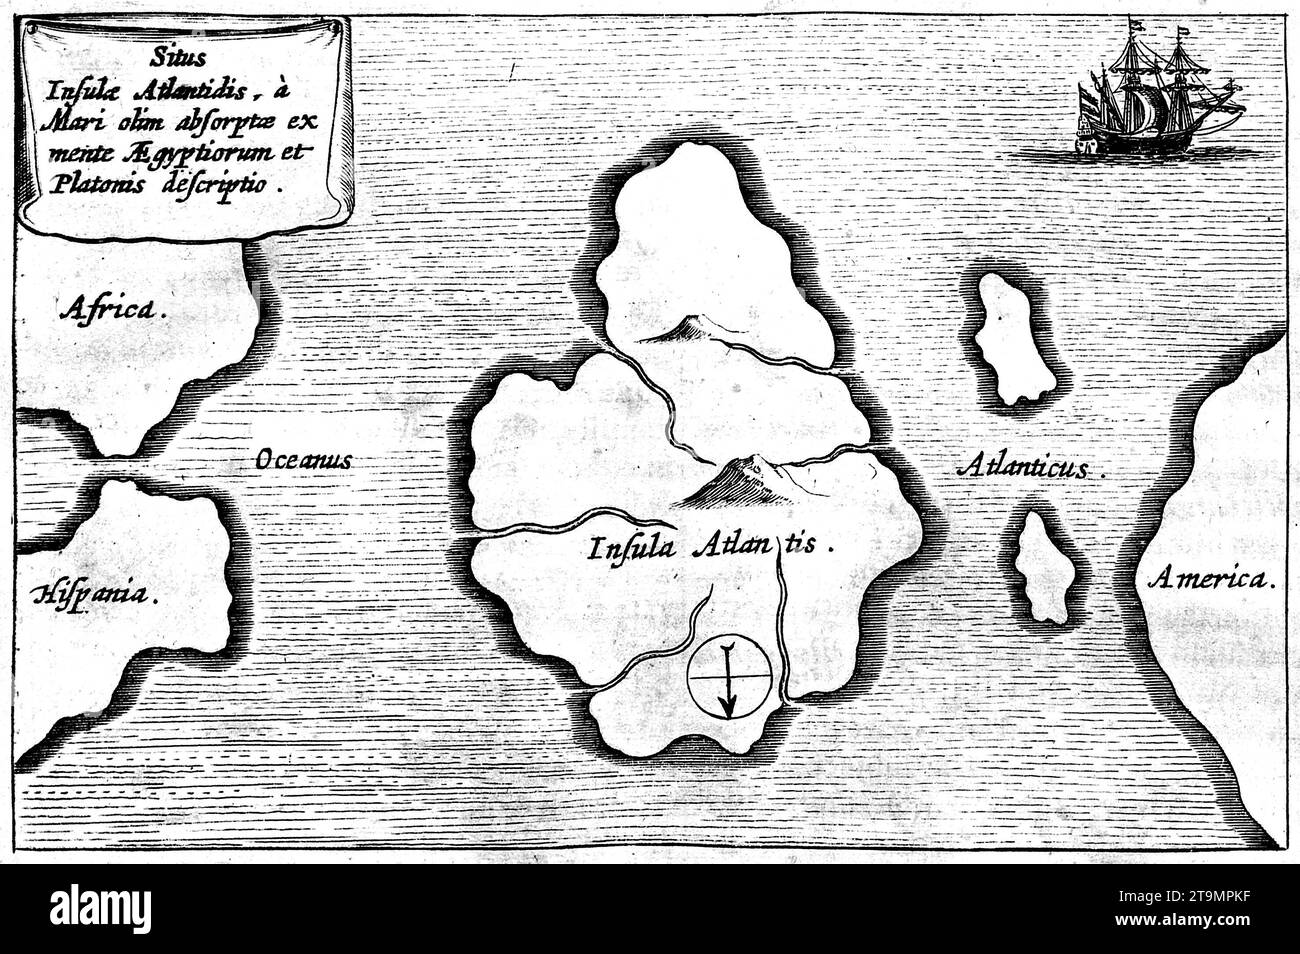 Atlantis. Athanasius Kircher's map of Atlantis, placing it in the middle of the Atlantic Ocean, from Mundus Subterraneus 1669, published in Amsterdam Stock Photo